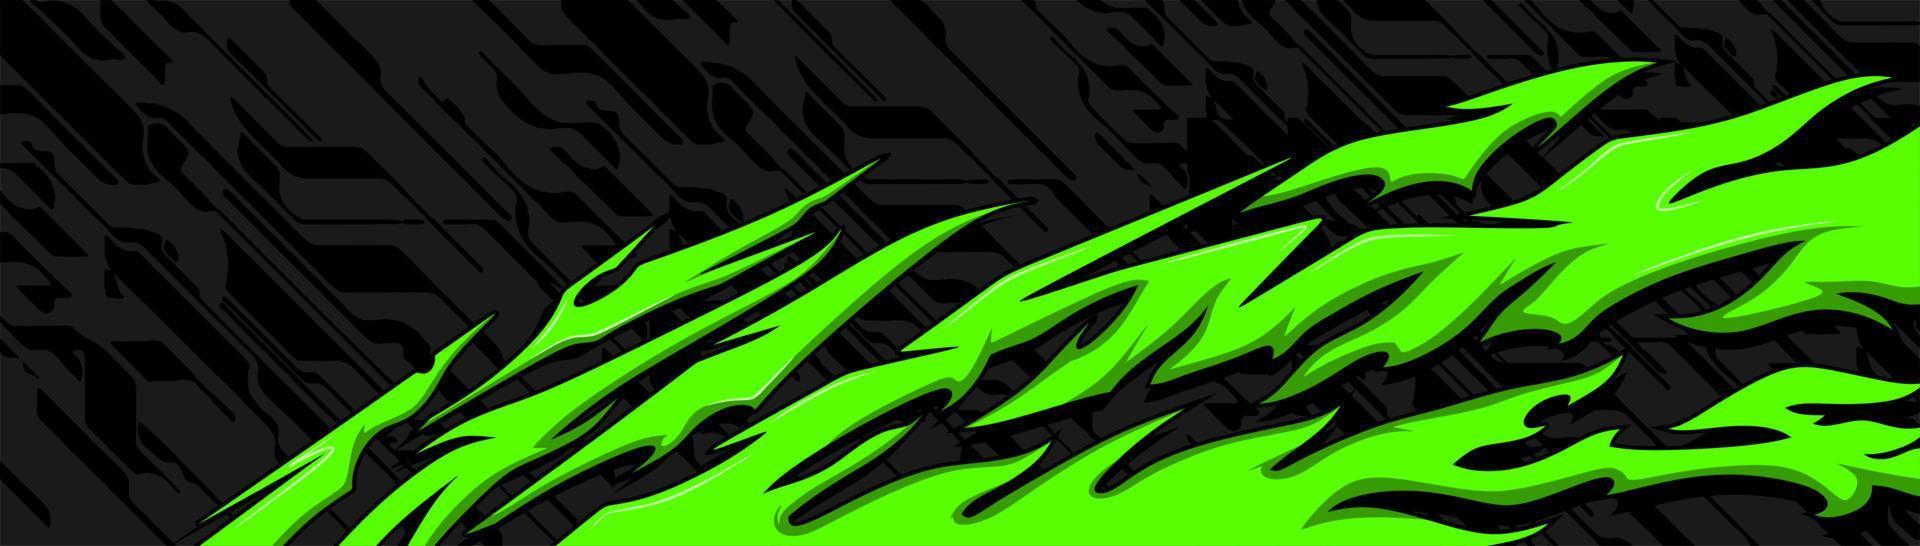 Abstract Car decal design vector. Graphic abstract stripe racing background kit designs for wrap vehicle, race car, rally, adventure and livery vector